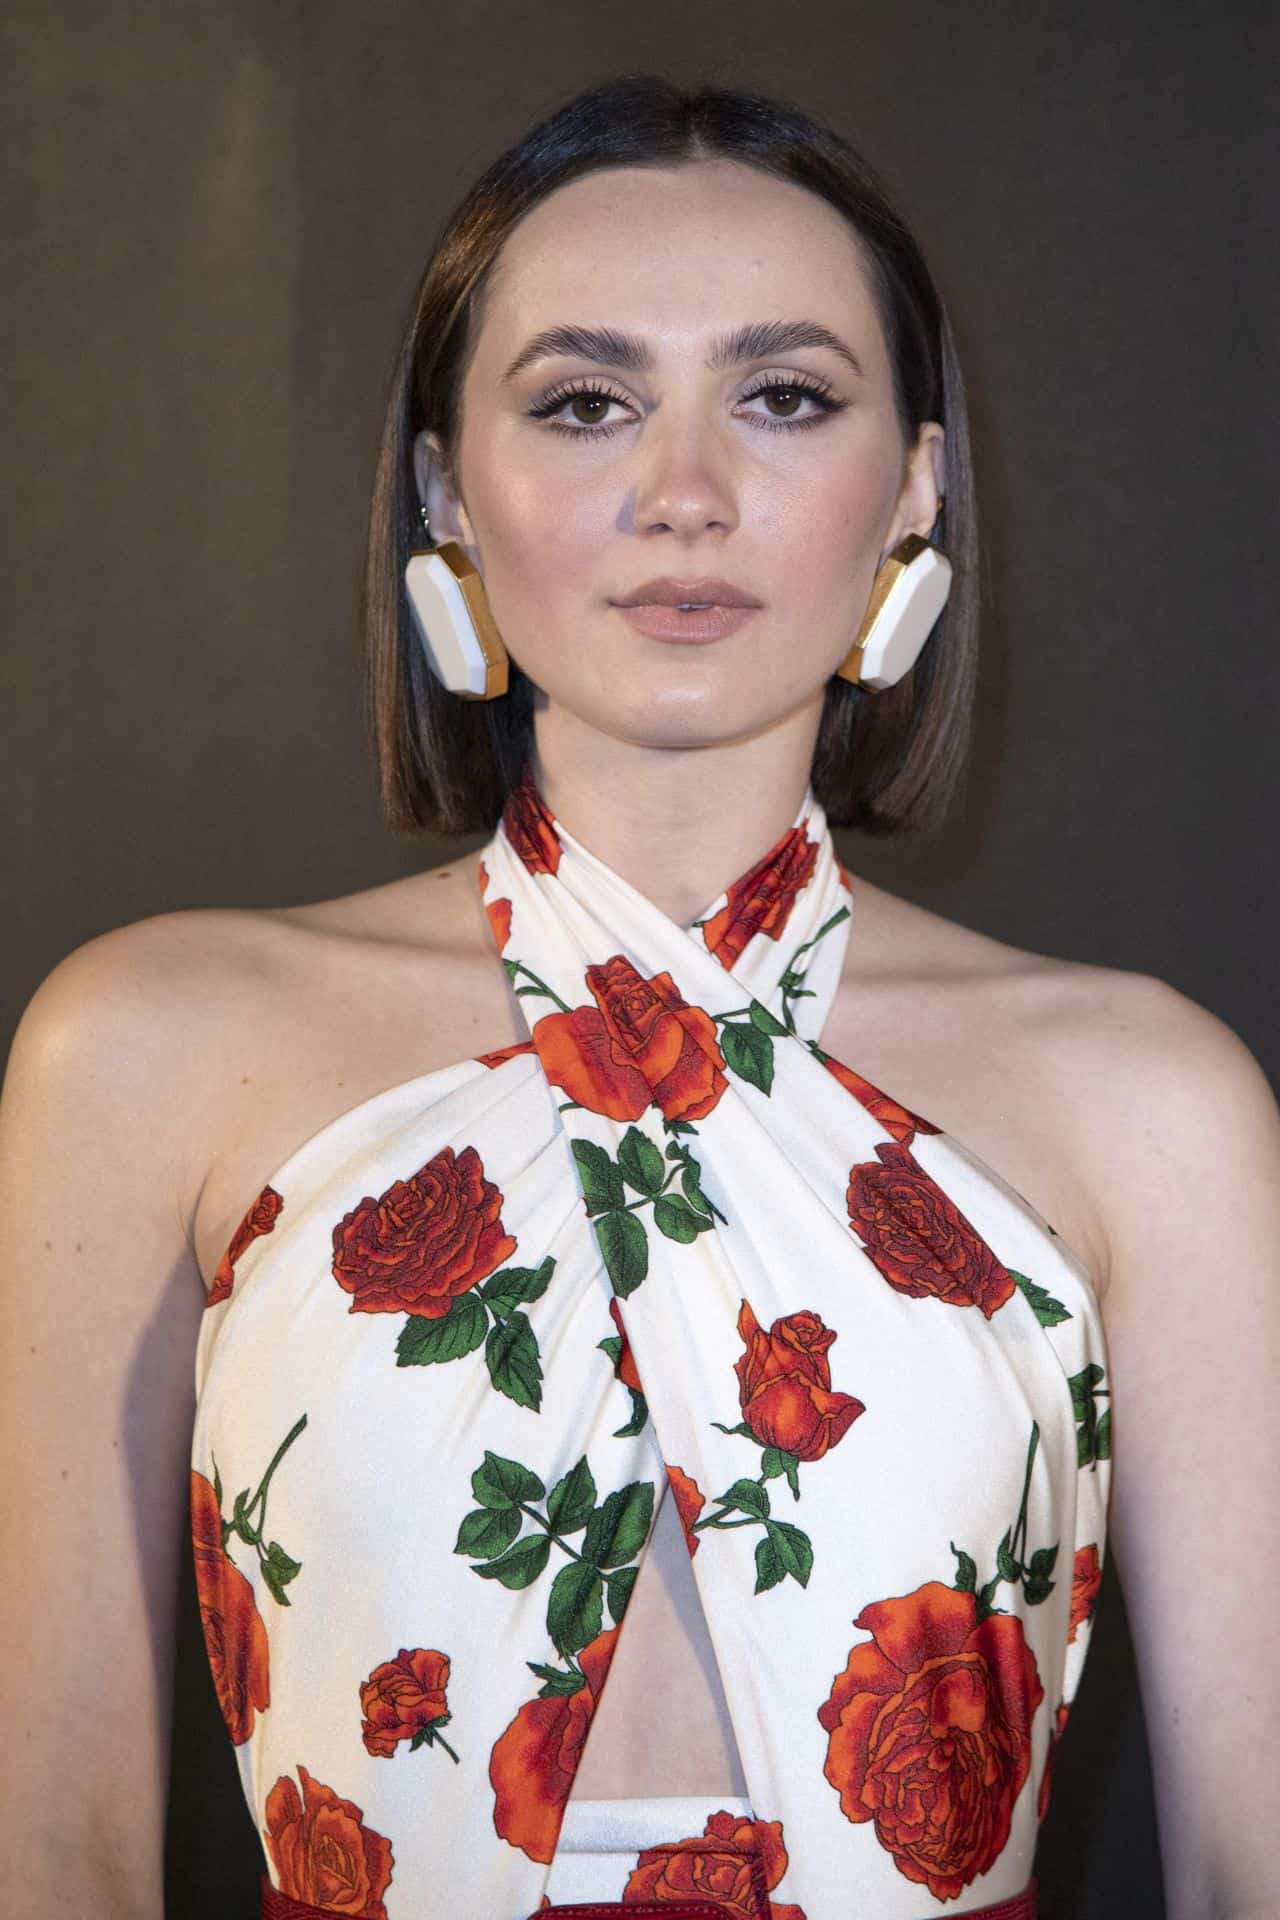 Maude Apatow Wore Jaw-Dropping Floral Jumpsuit at Saint Laurent's PFW Show